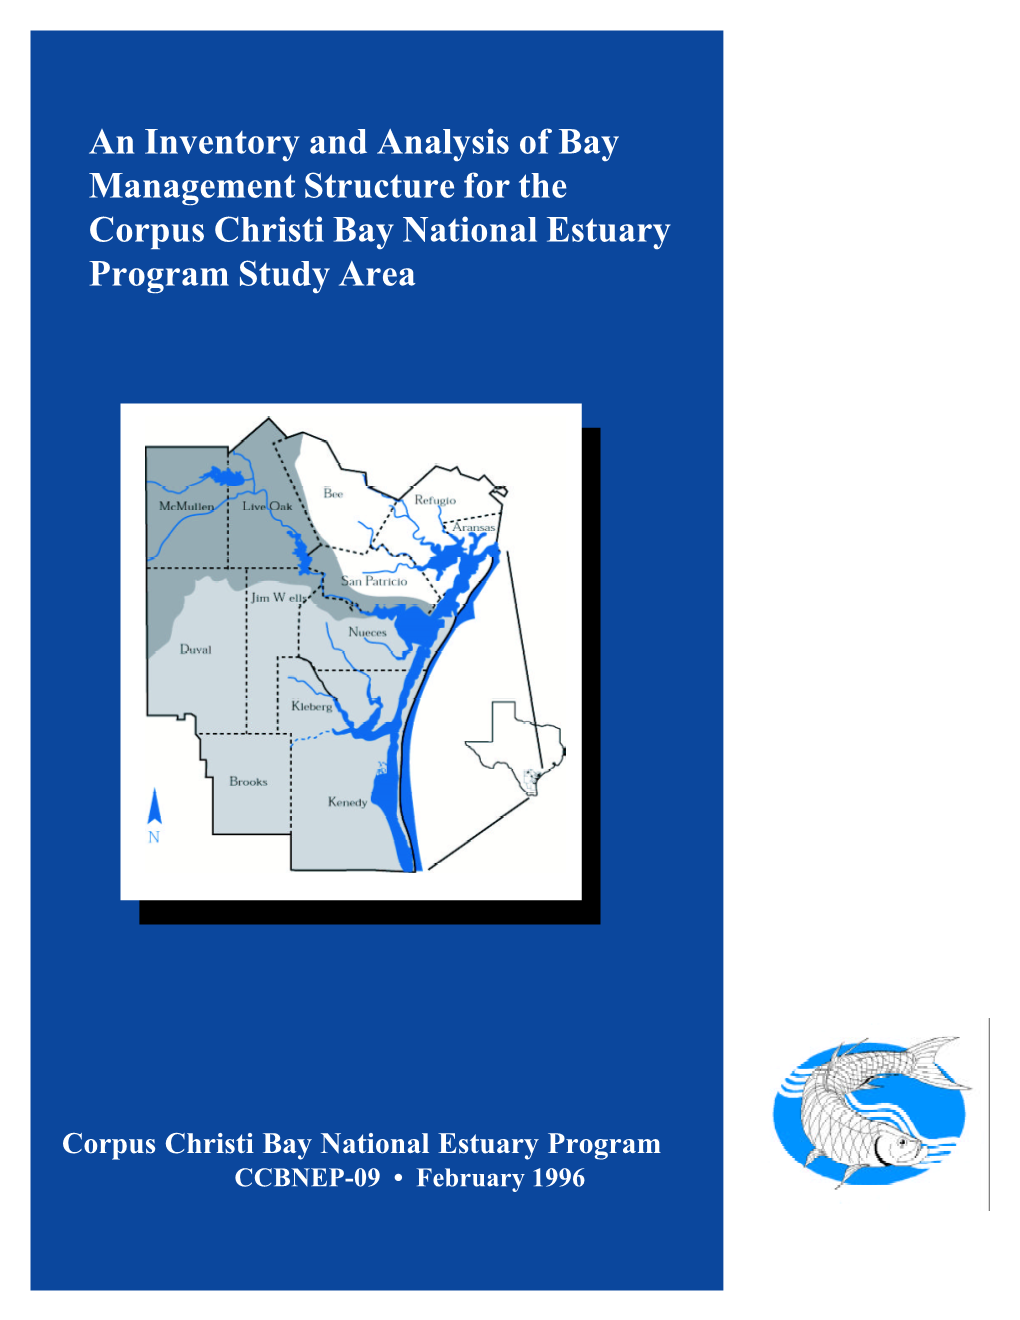 An Inventory and Analysis of Bay Management Structure for the Corpus Christi Bay National Estuary Program Study Area